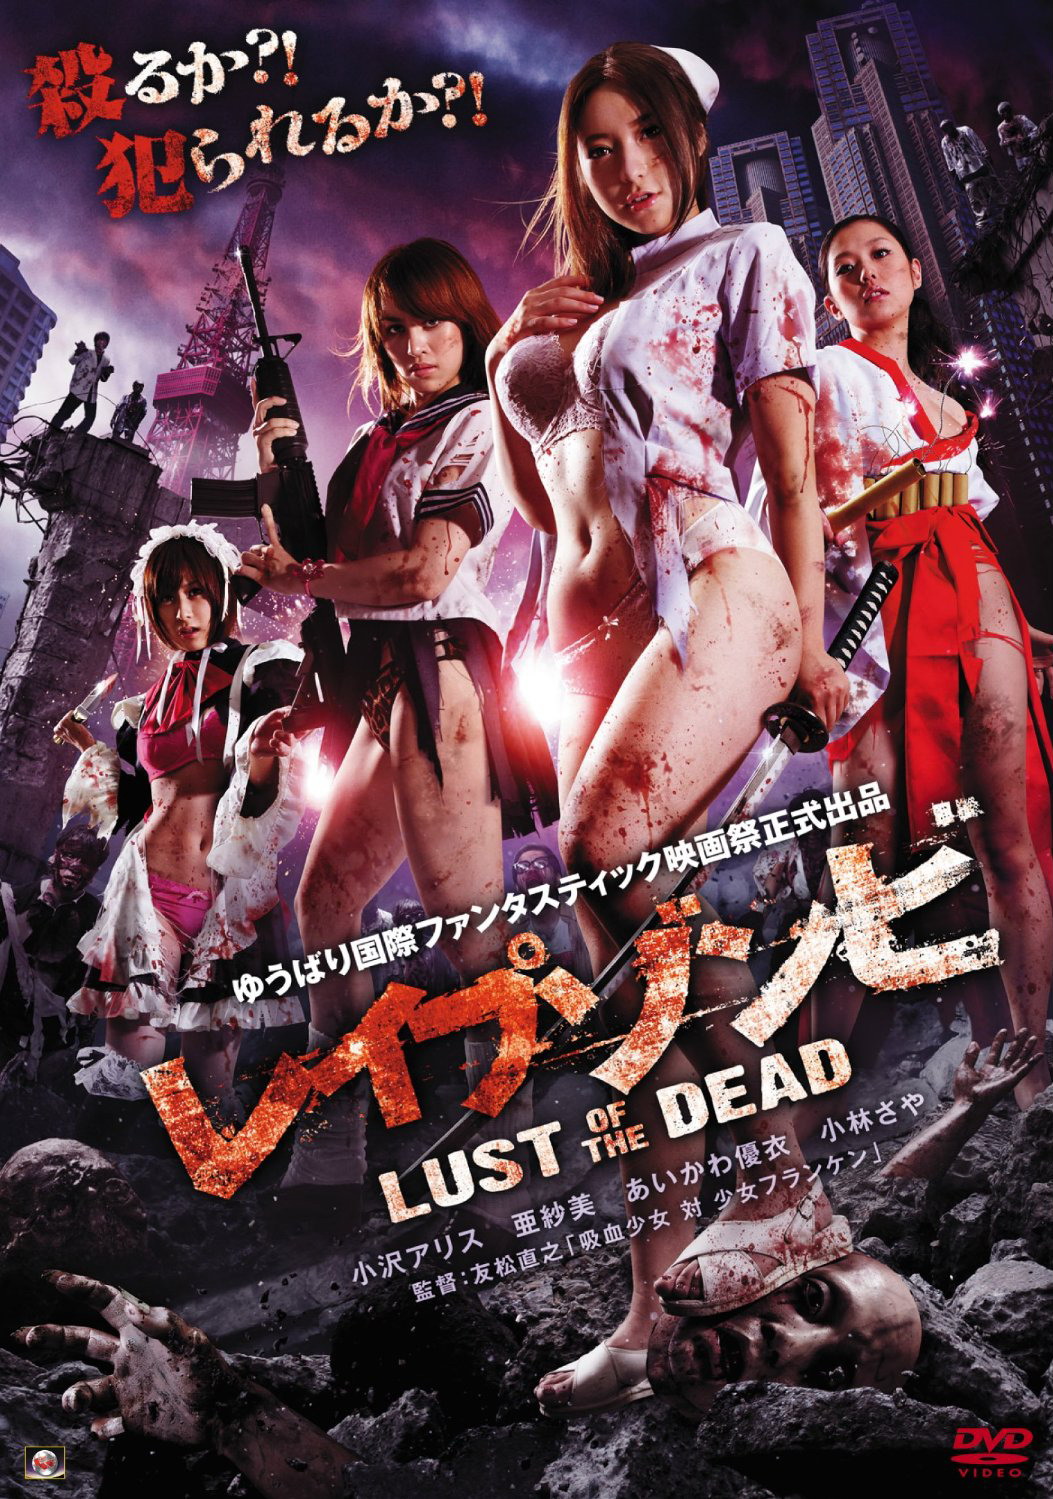 Zombie X Full Movie - Film Review: Rape Zombie: Lust of the Dead (2012) | HNN